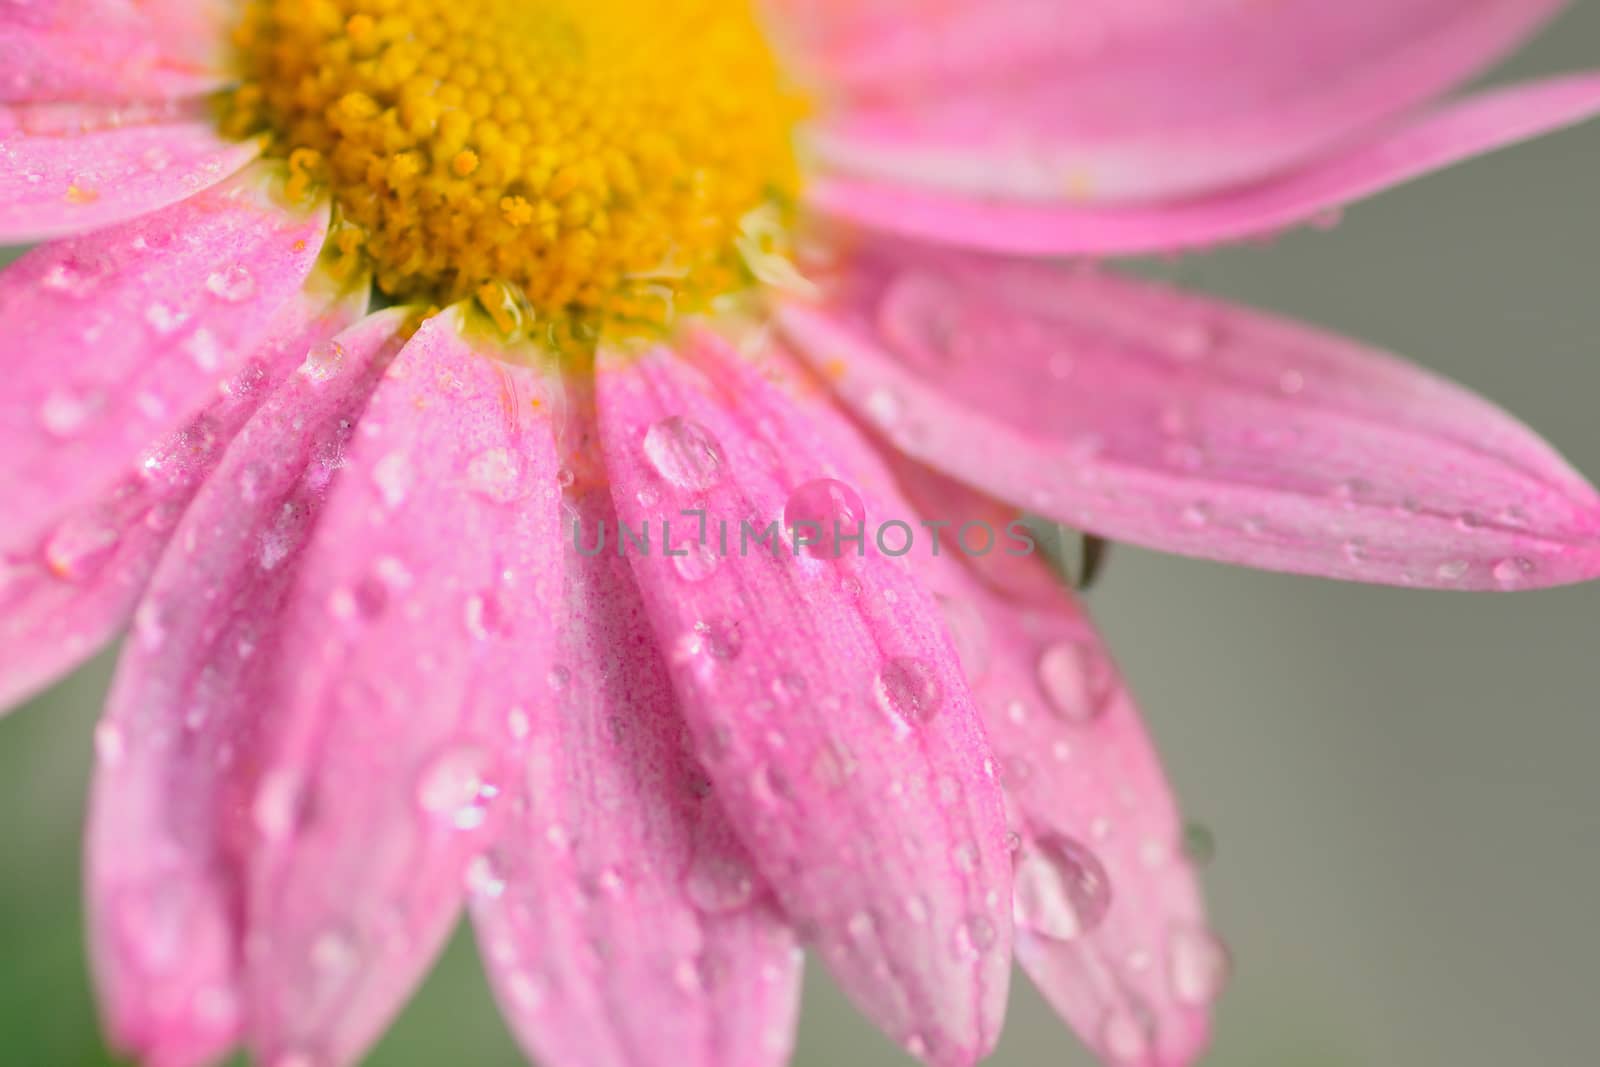 Macro texture of pink colored Daisy flowers with water droplets in horizontal frame